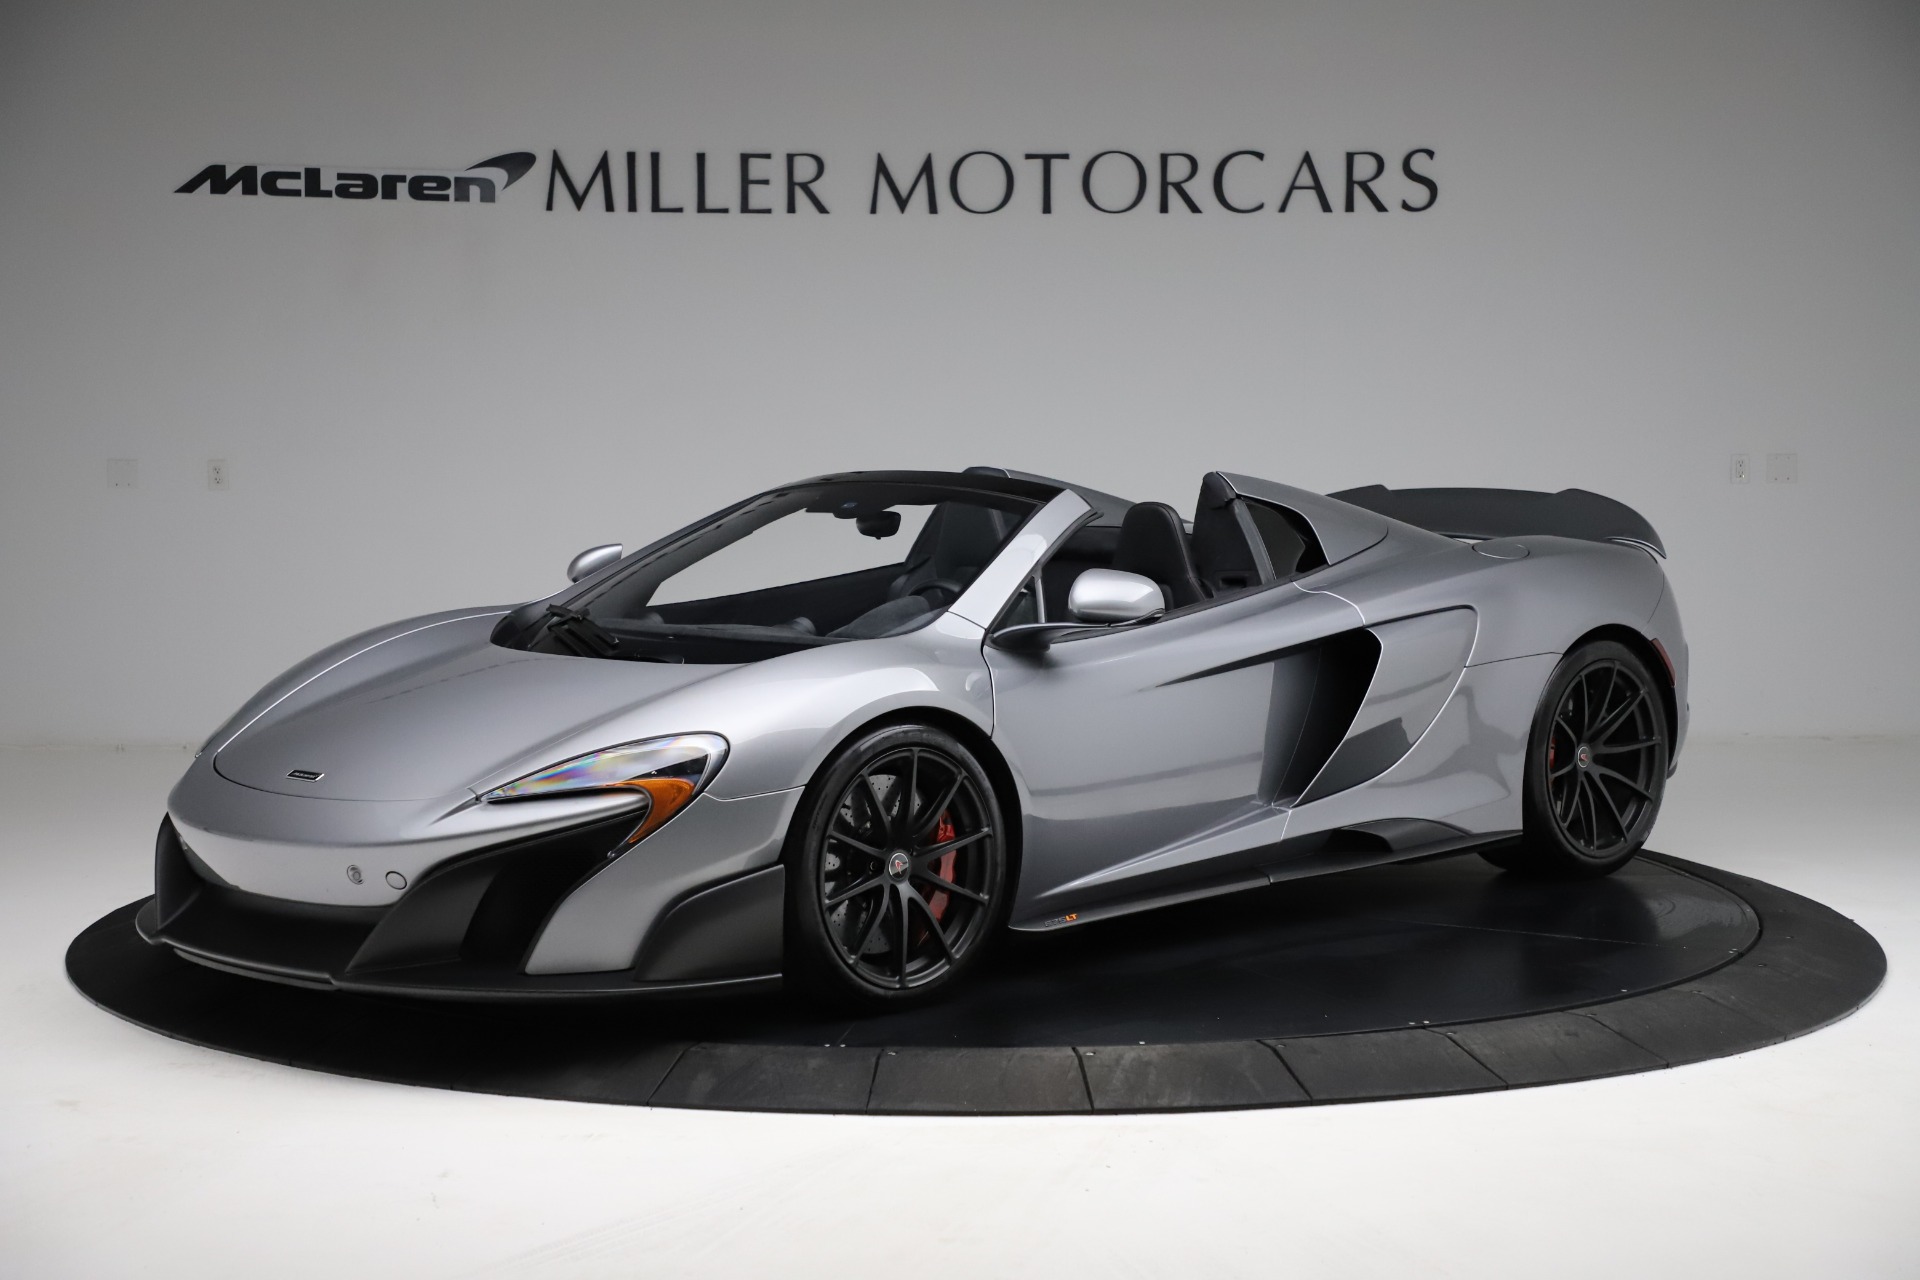 Used 2016 McLaren 675LT Spider for sale Sold at Rolls-Royce Motor Cars Greenwich in Greenwich CT 06830 1